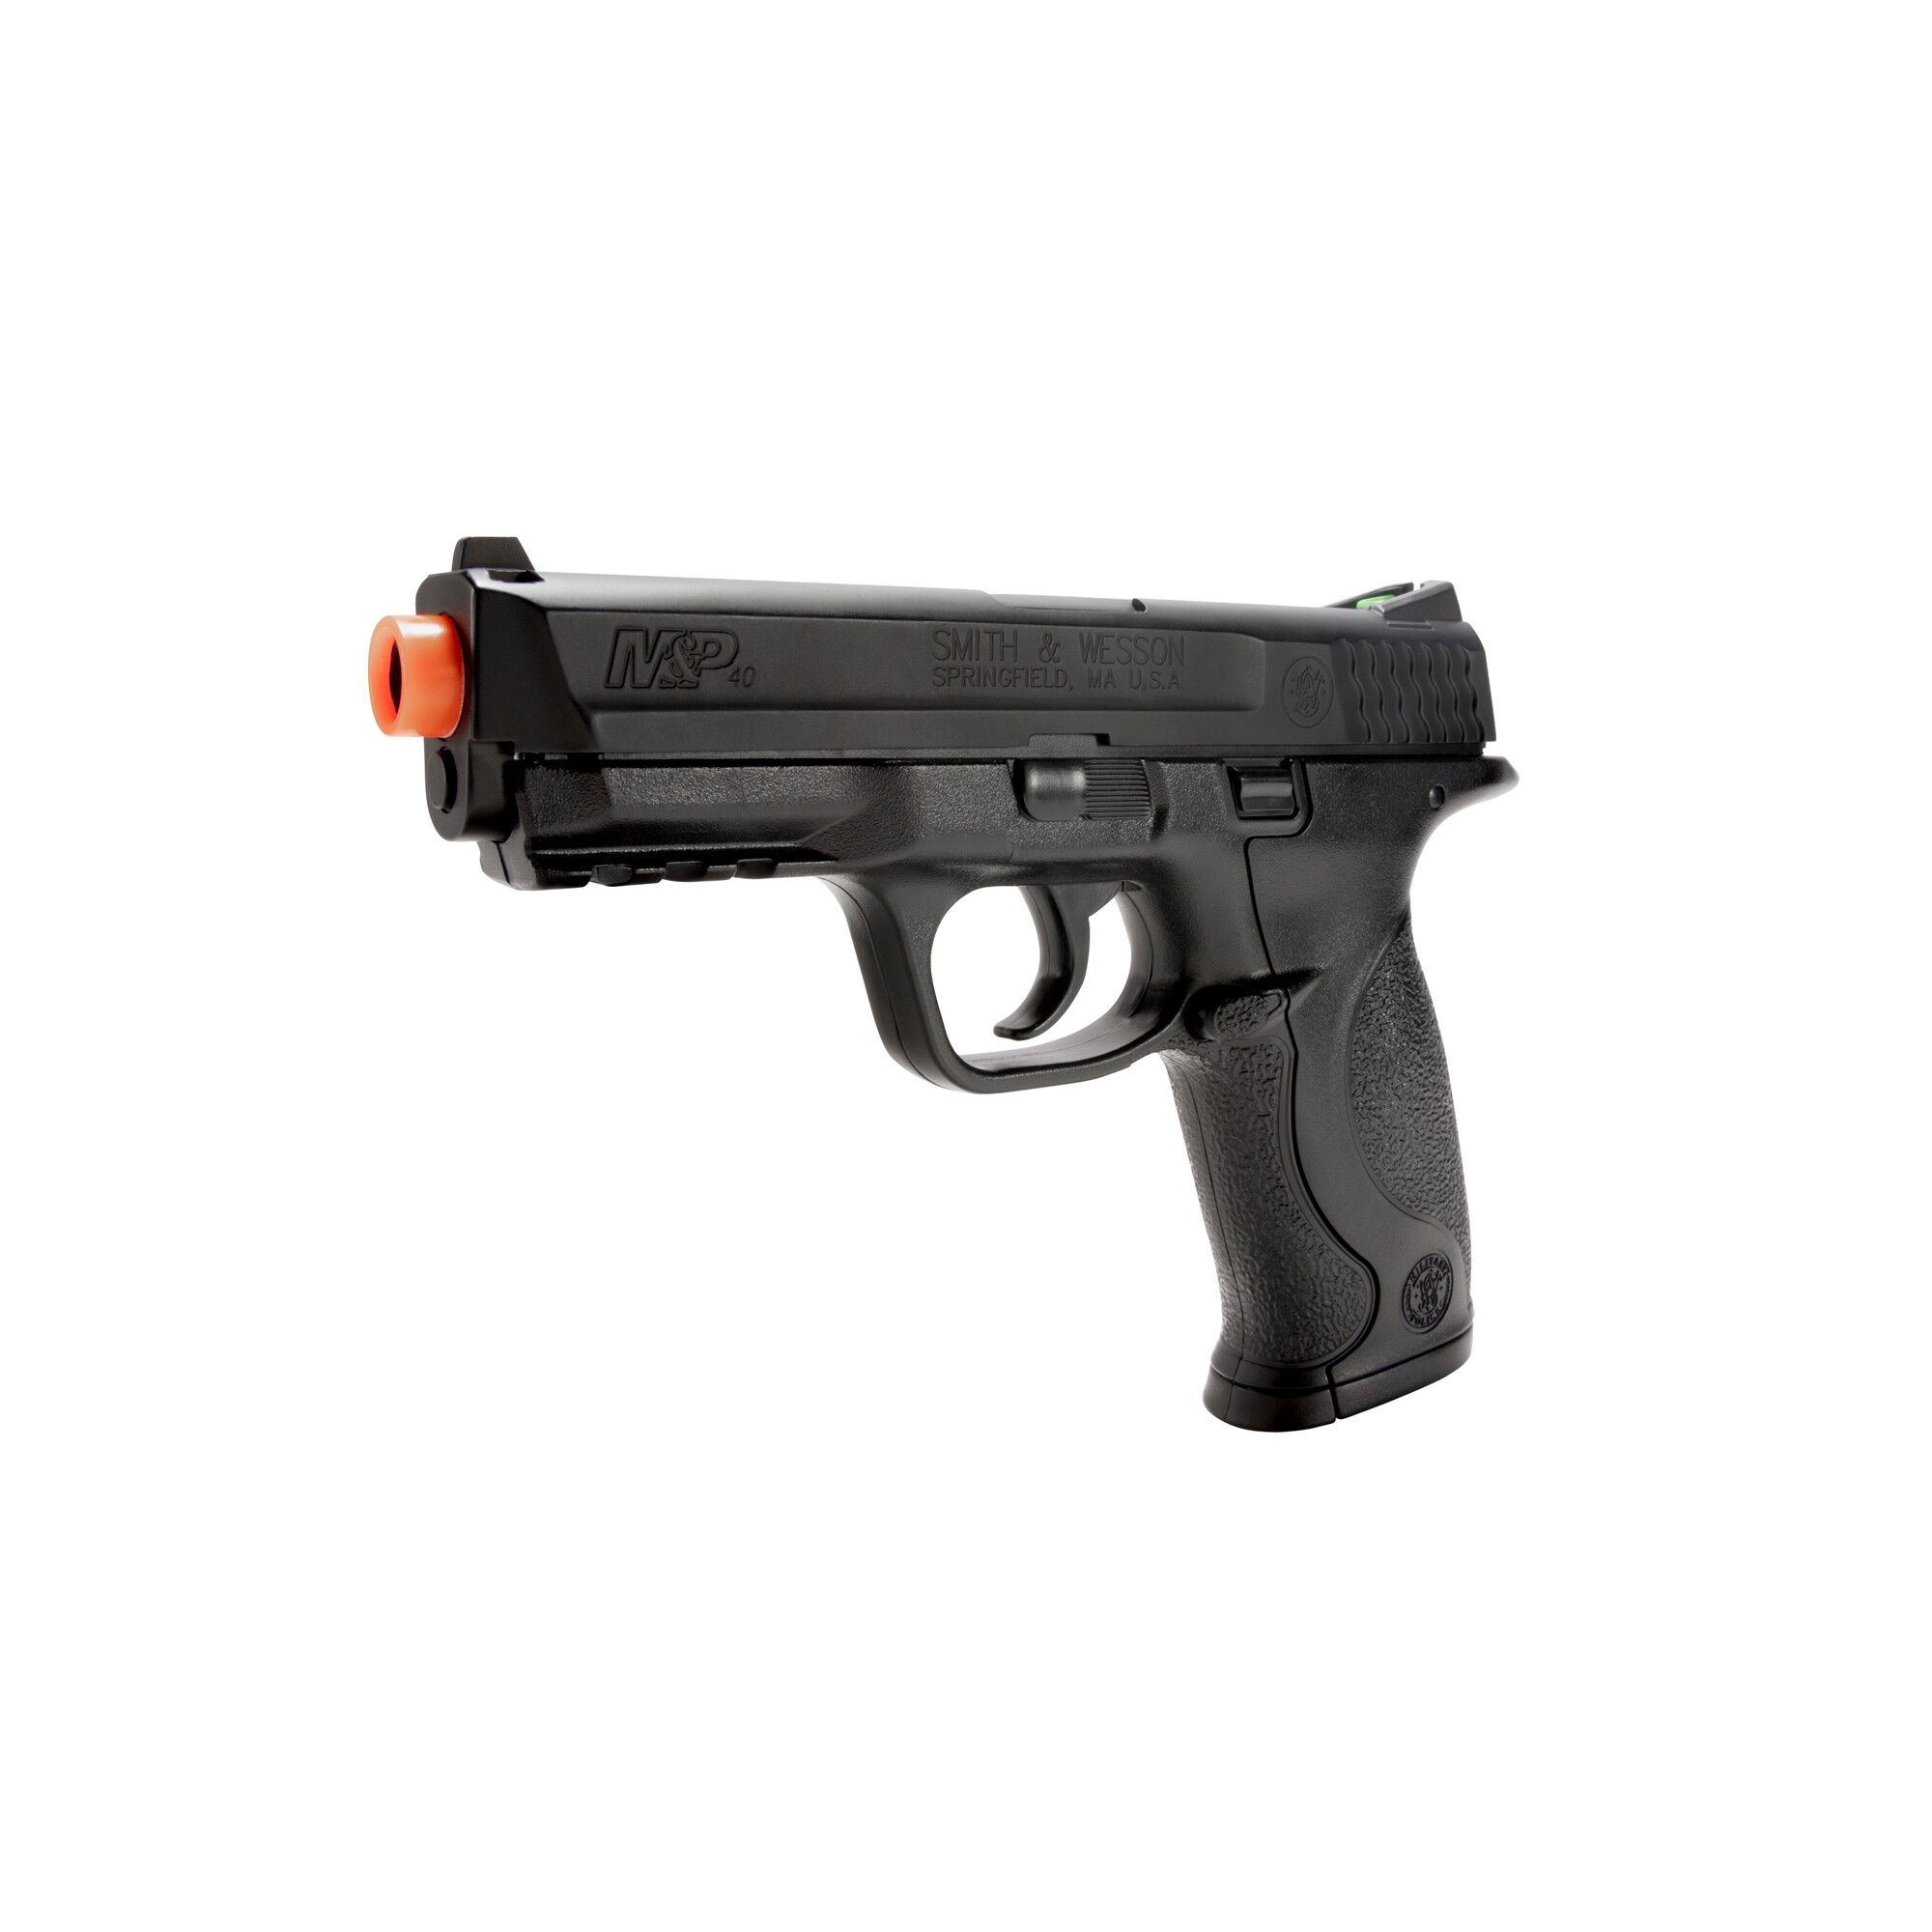 CO2 Blowback Airsoft Pistols